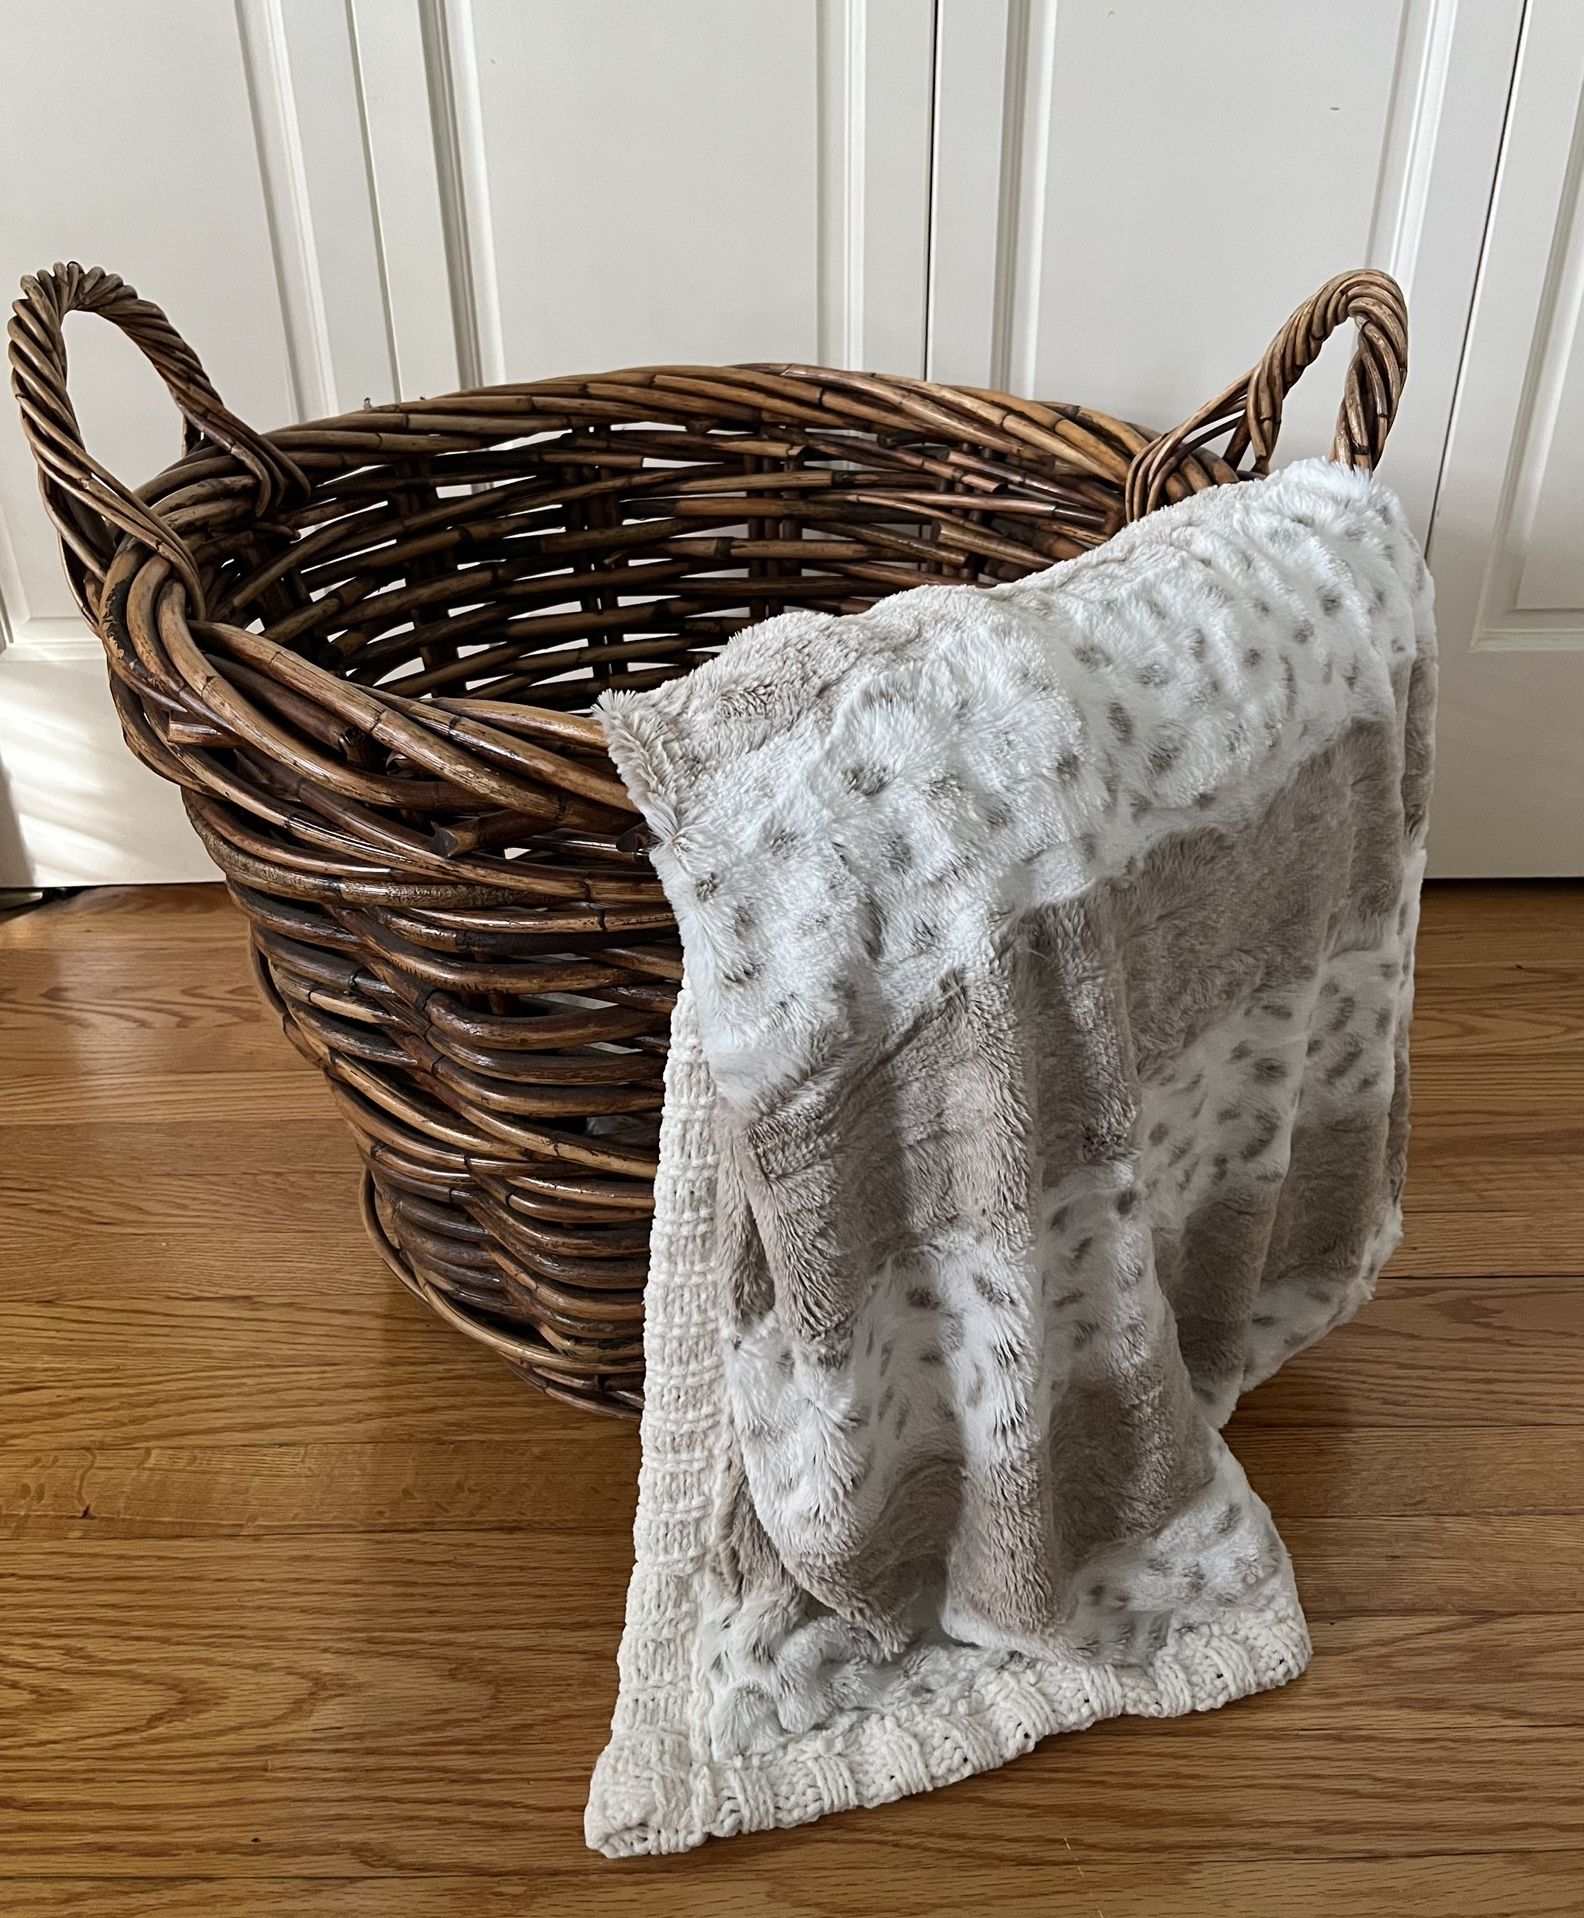 Large Pottery Barn Woven Reed Basket